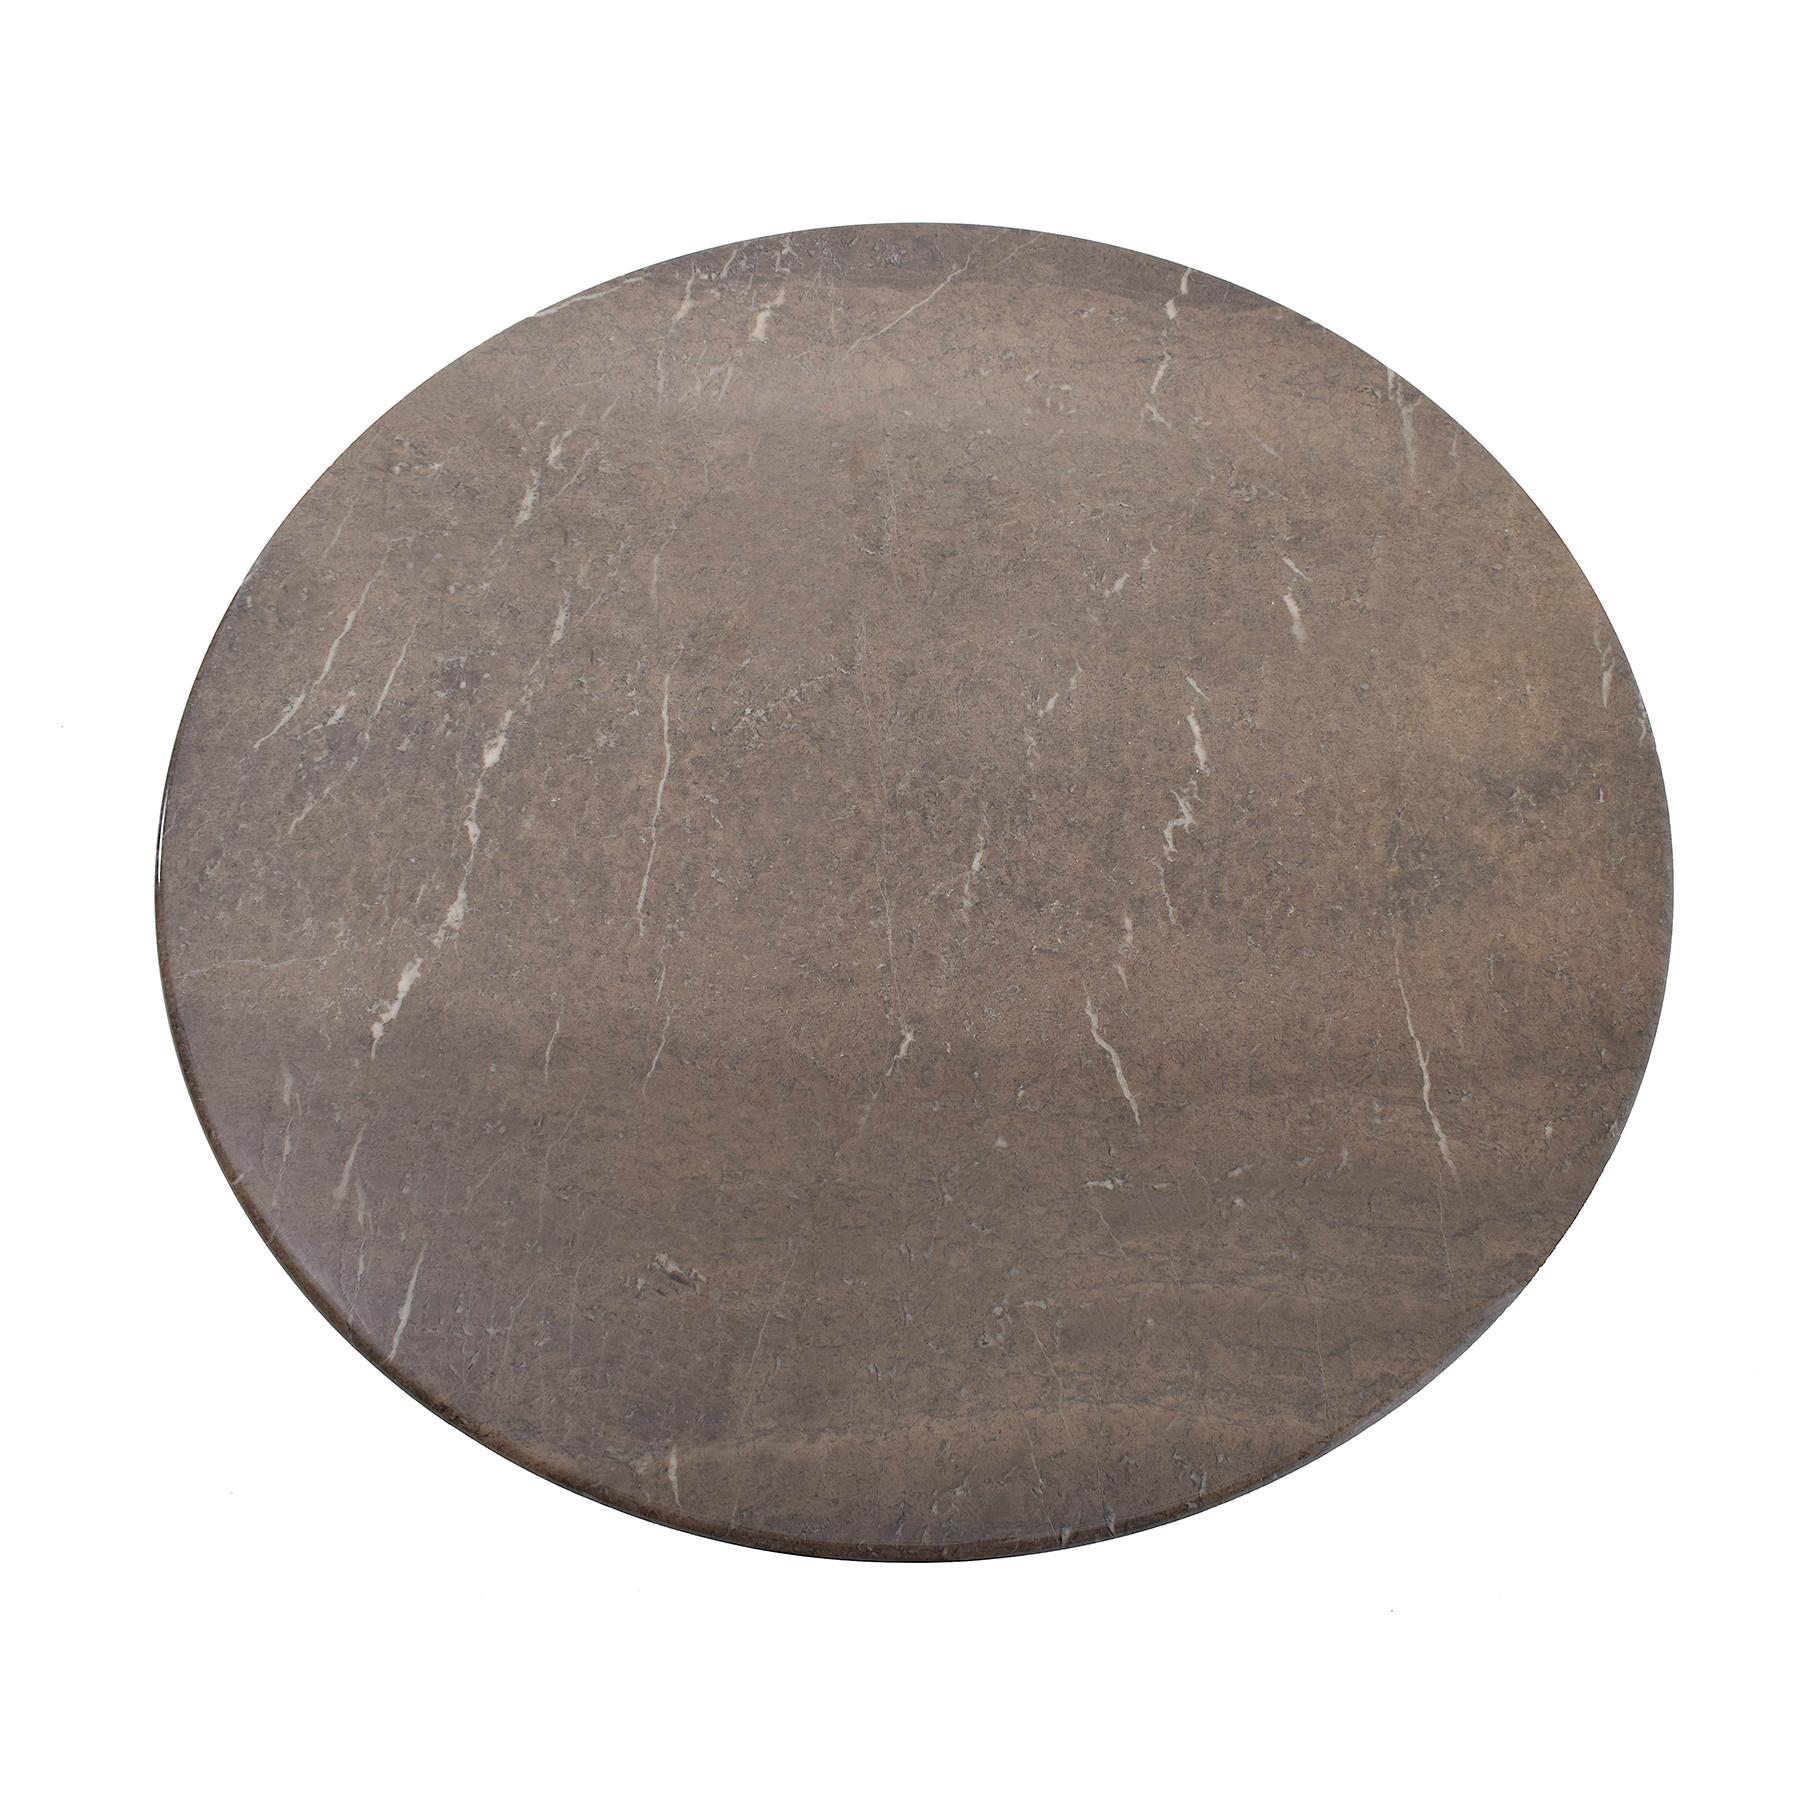 1970 Round Marble Table, by Angelo Mangiarotti for Skipper 1